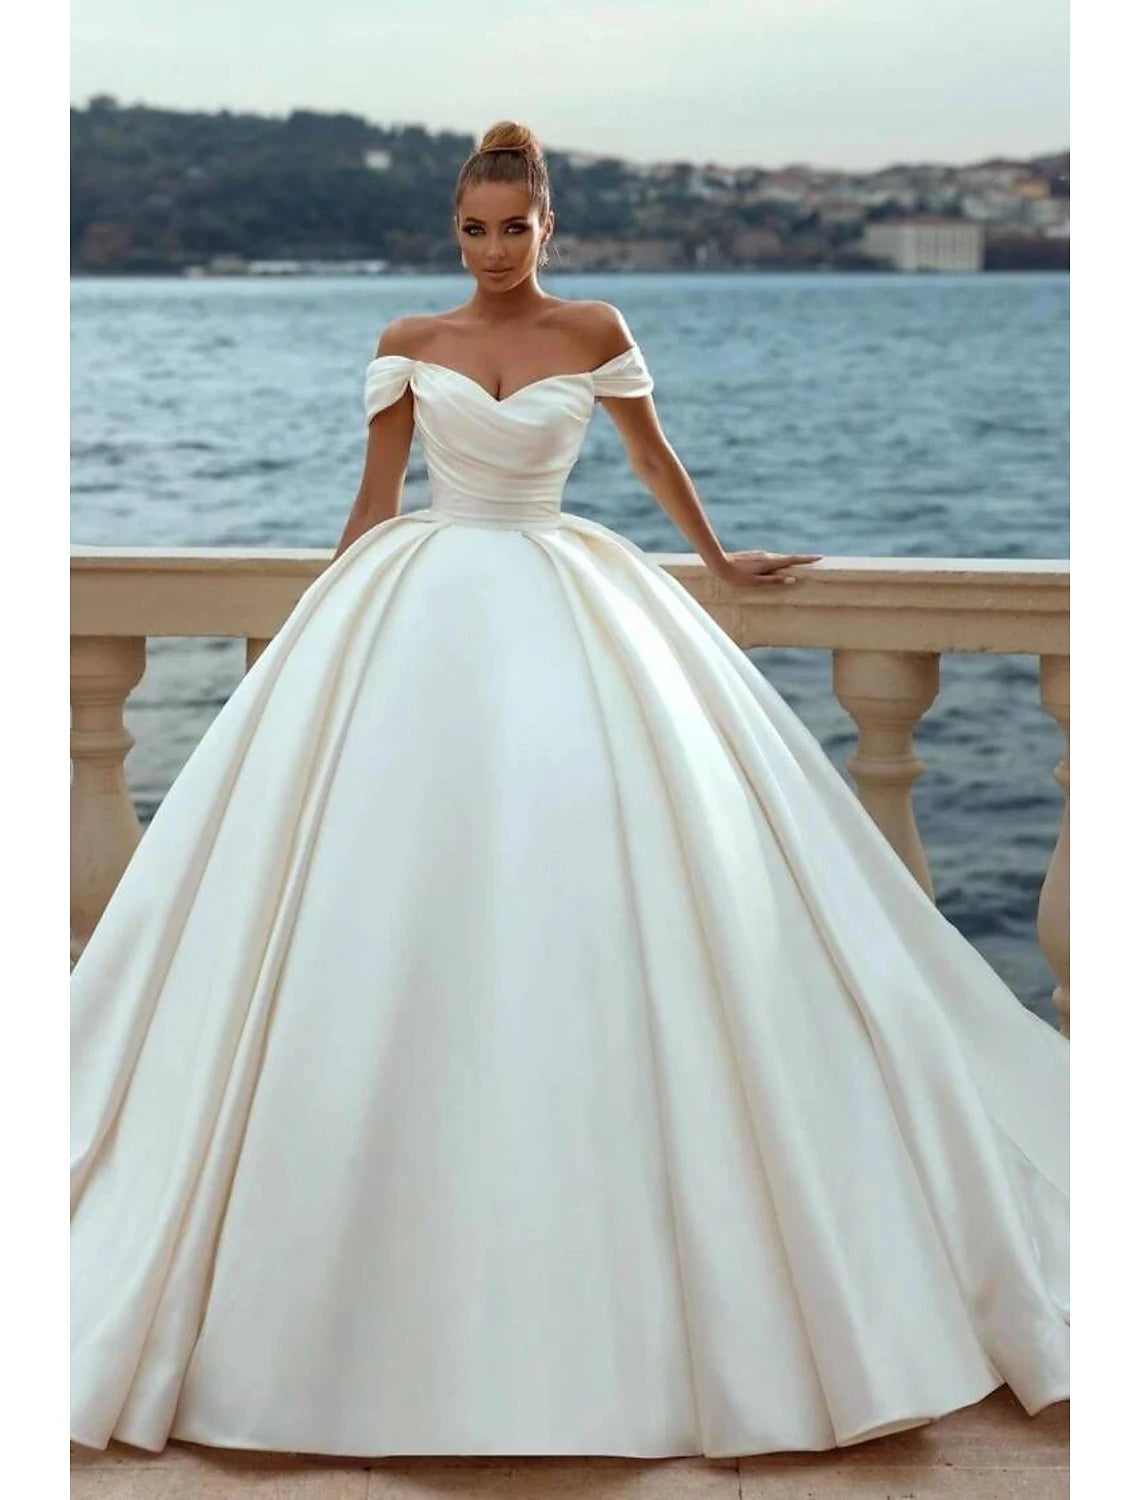 Engagement Formal Wedding Dresses Ball Gown Off Shoulder Cap Sleeve Court Train Satin Bridal Gowns With Ruched Solid Color